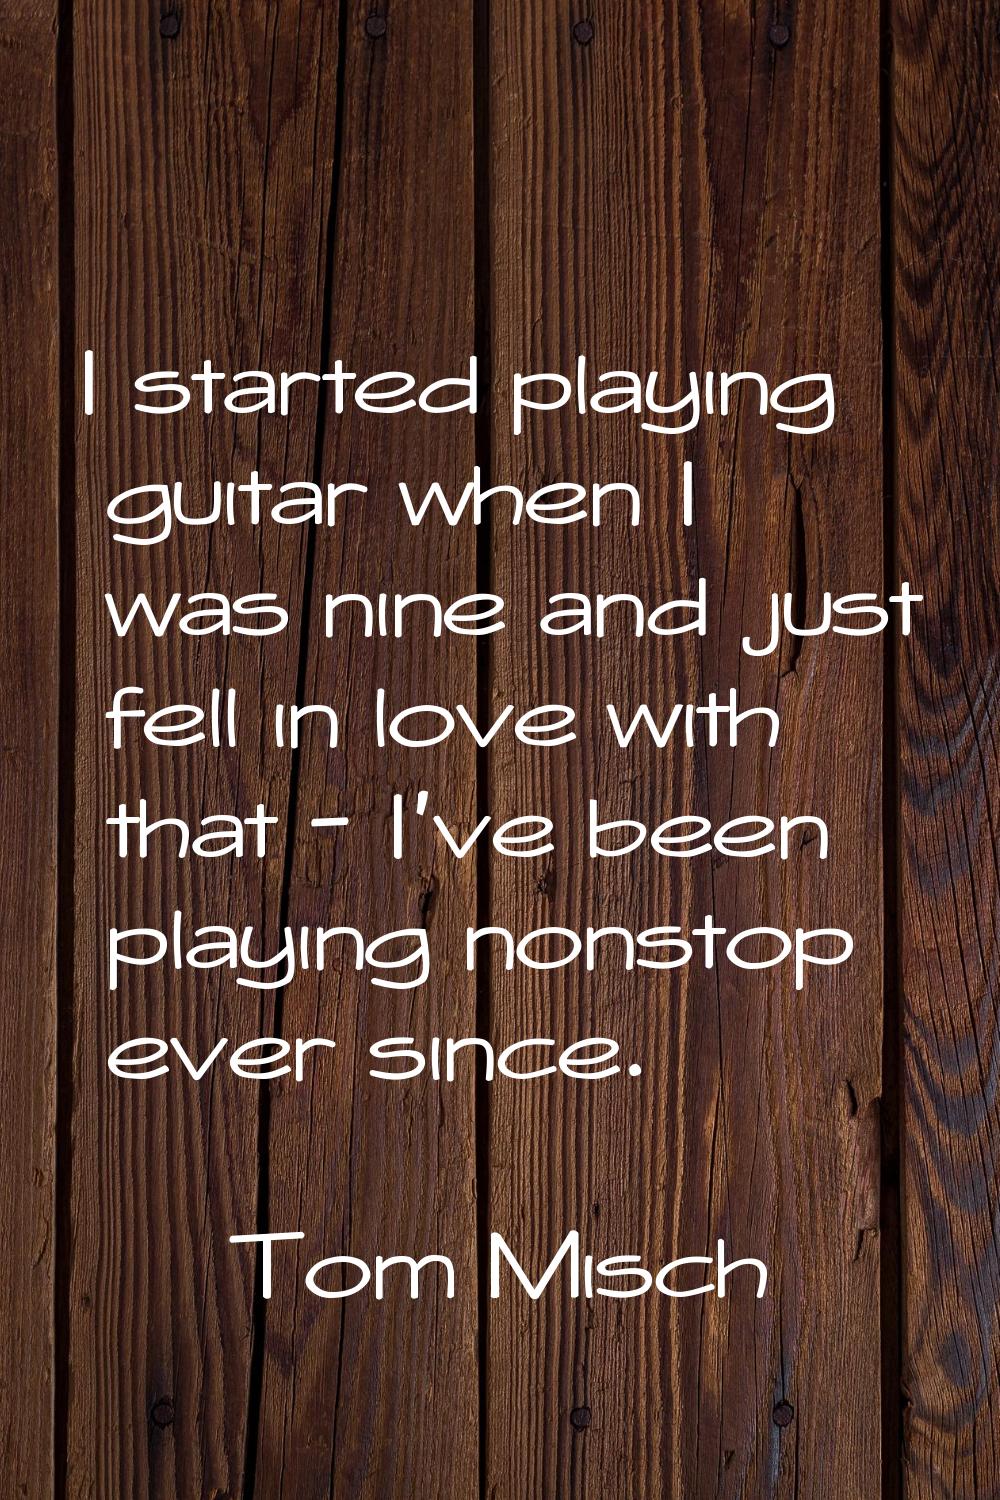 I started playing guitar when I was nine and just fell in love with that - I've been playing nonsto